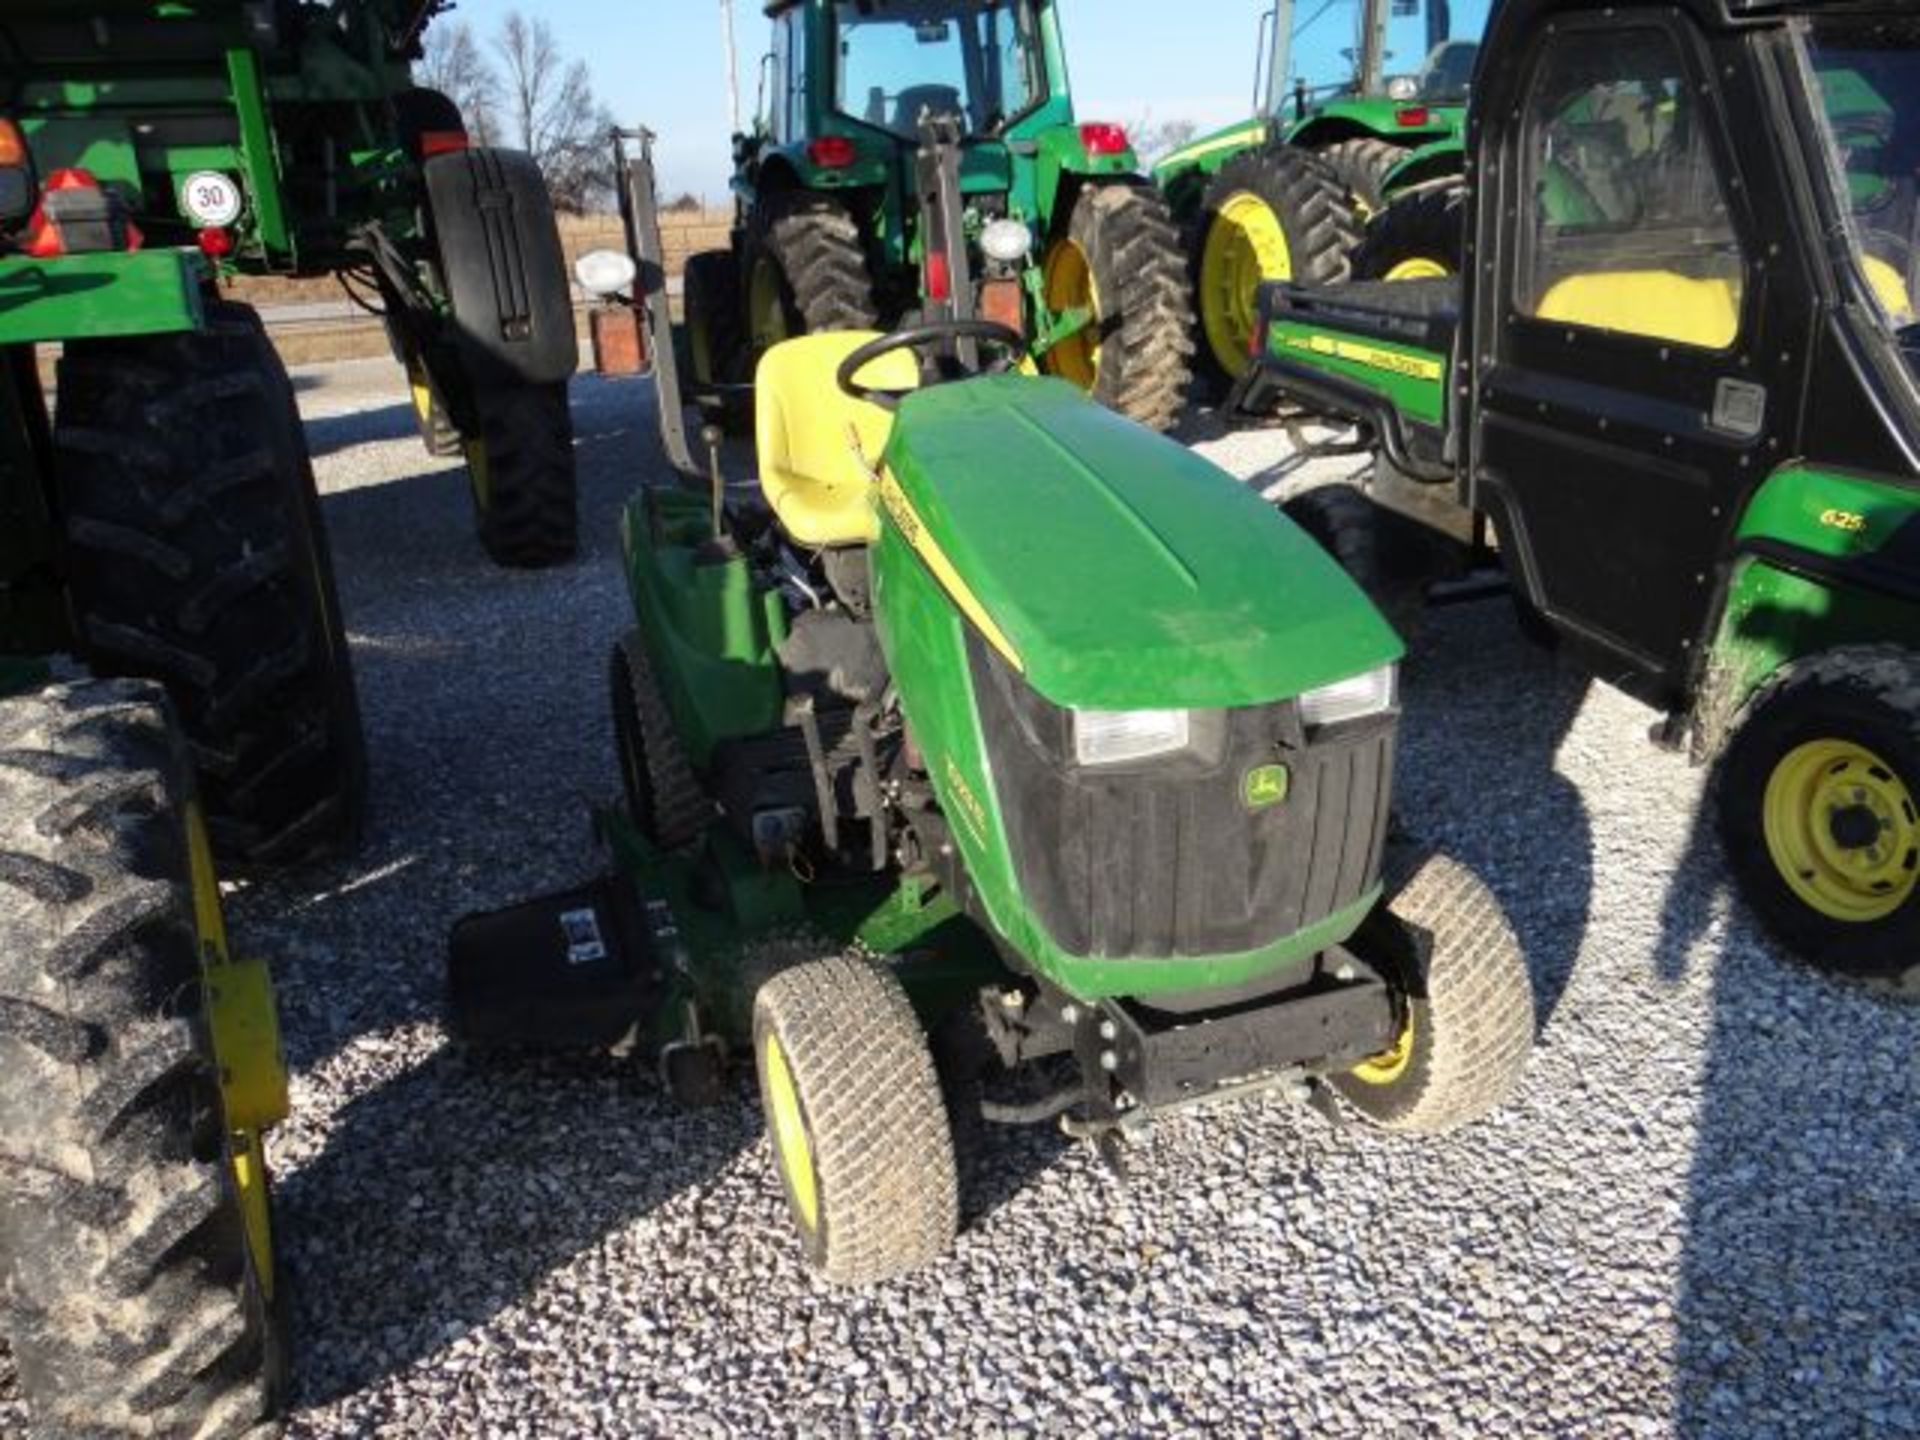 JD 1023E Compact Tractor, 2011 #112140, 405 hrs, Turf Tires, Foldable ROPS, 60D Deck - Bild 2 aus 4